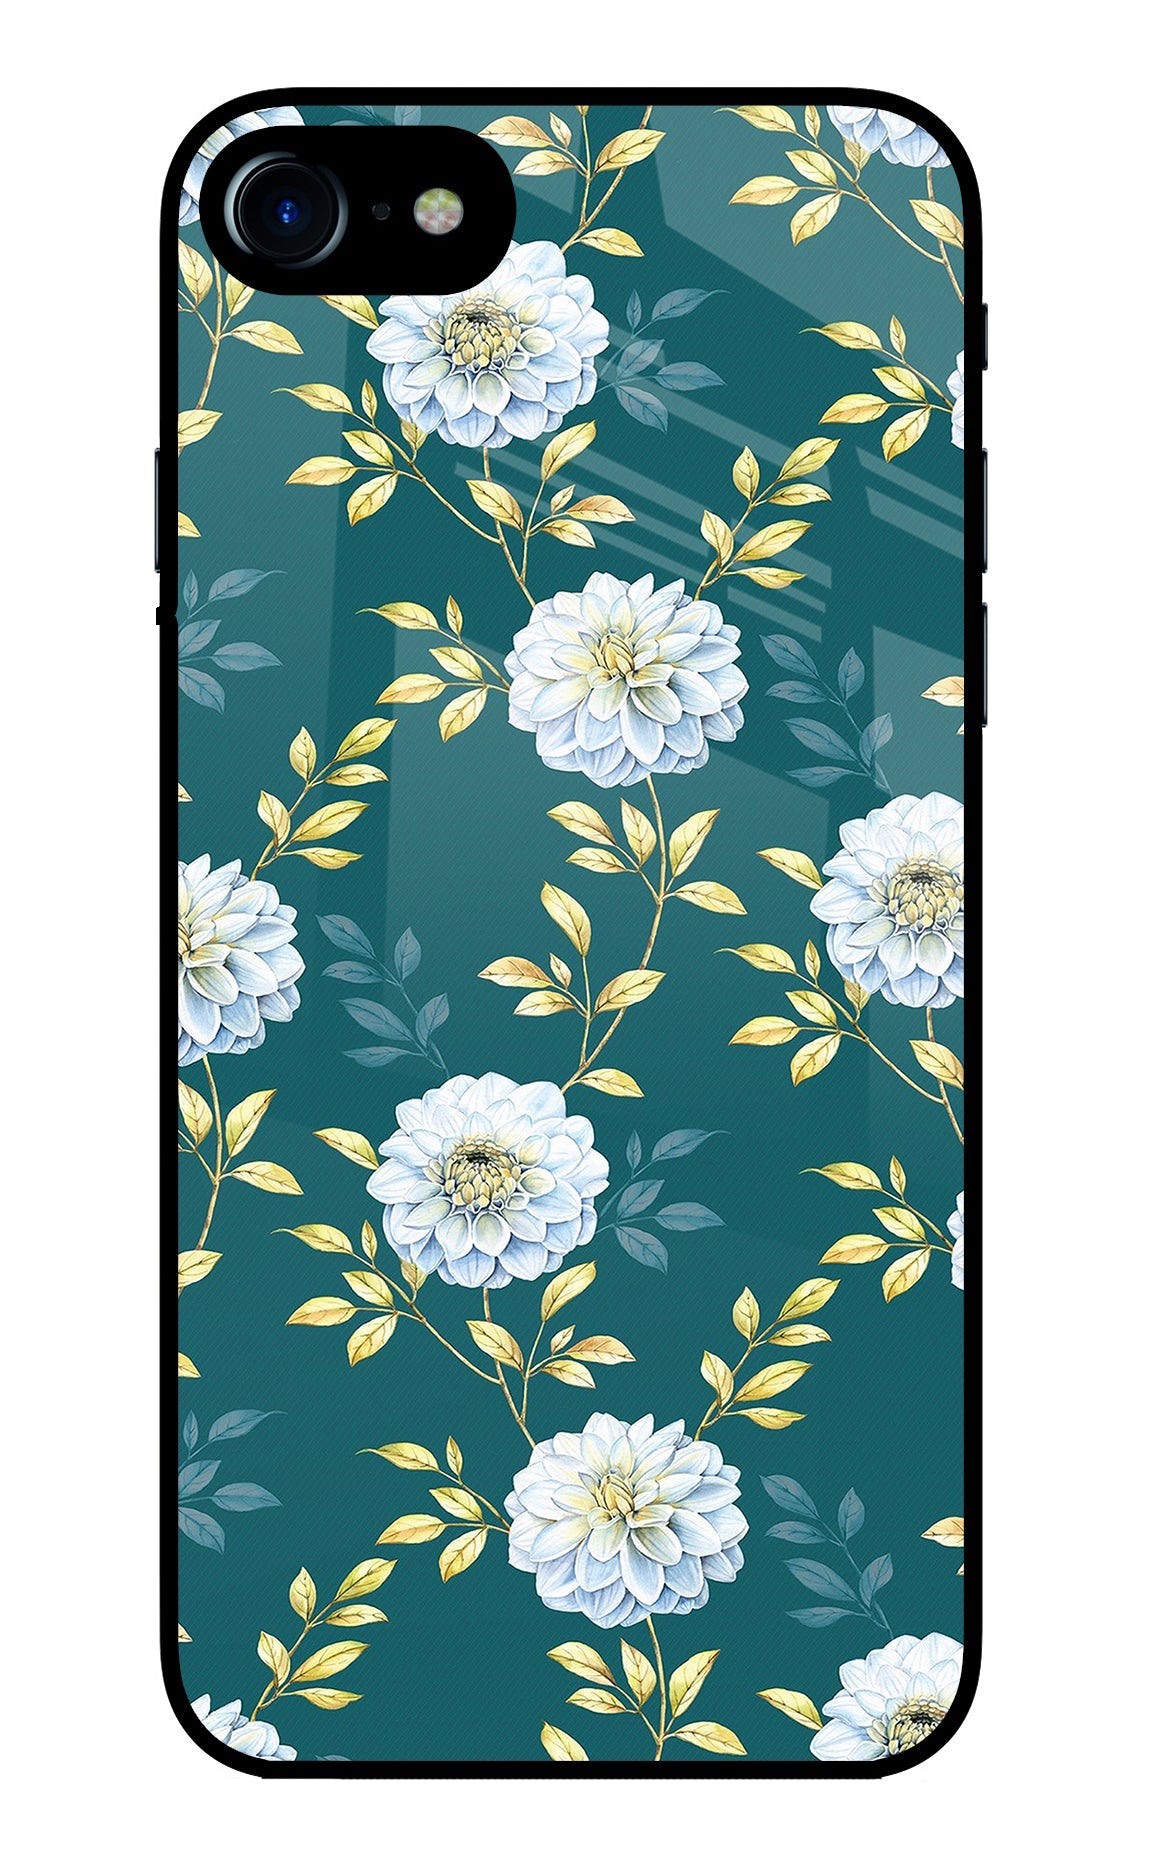 Flowers iPhone 7/7s Glass Case